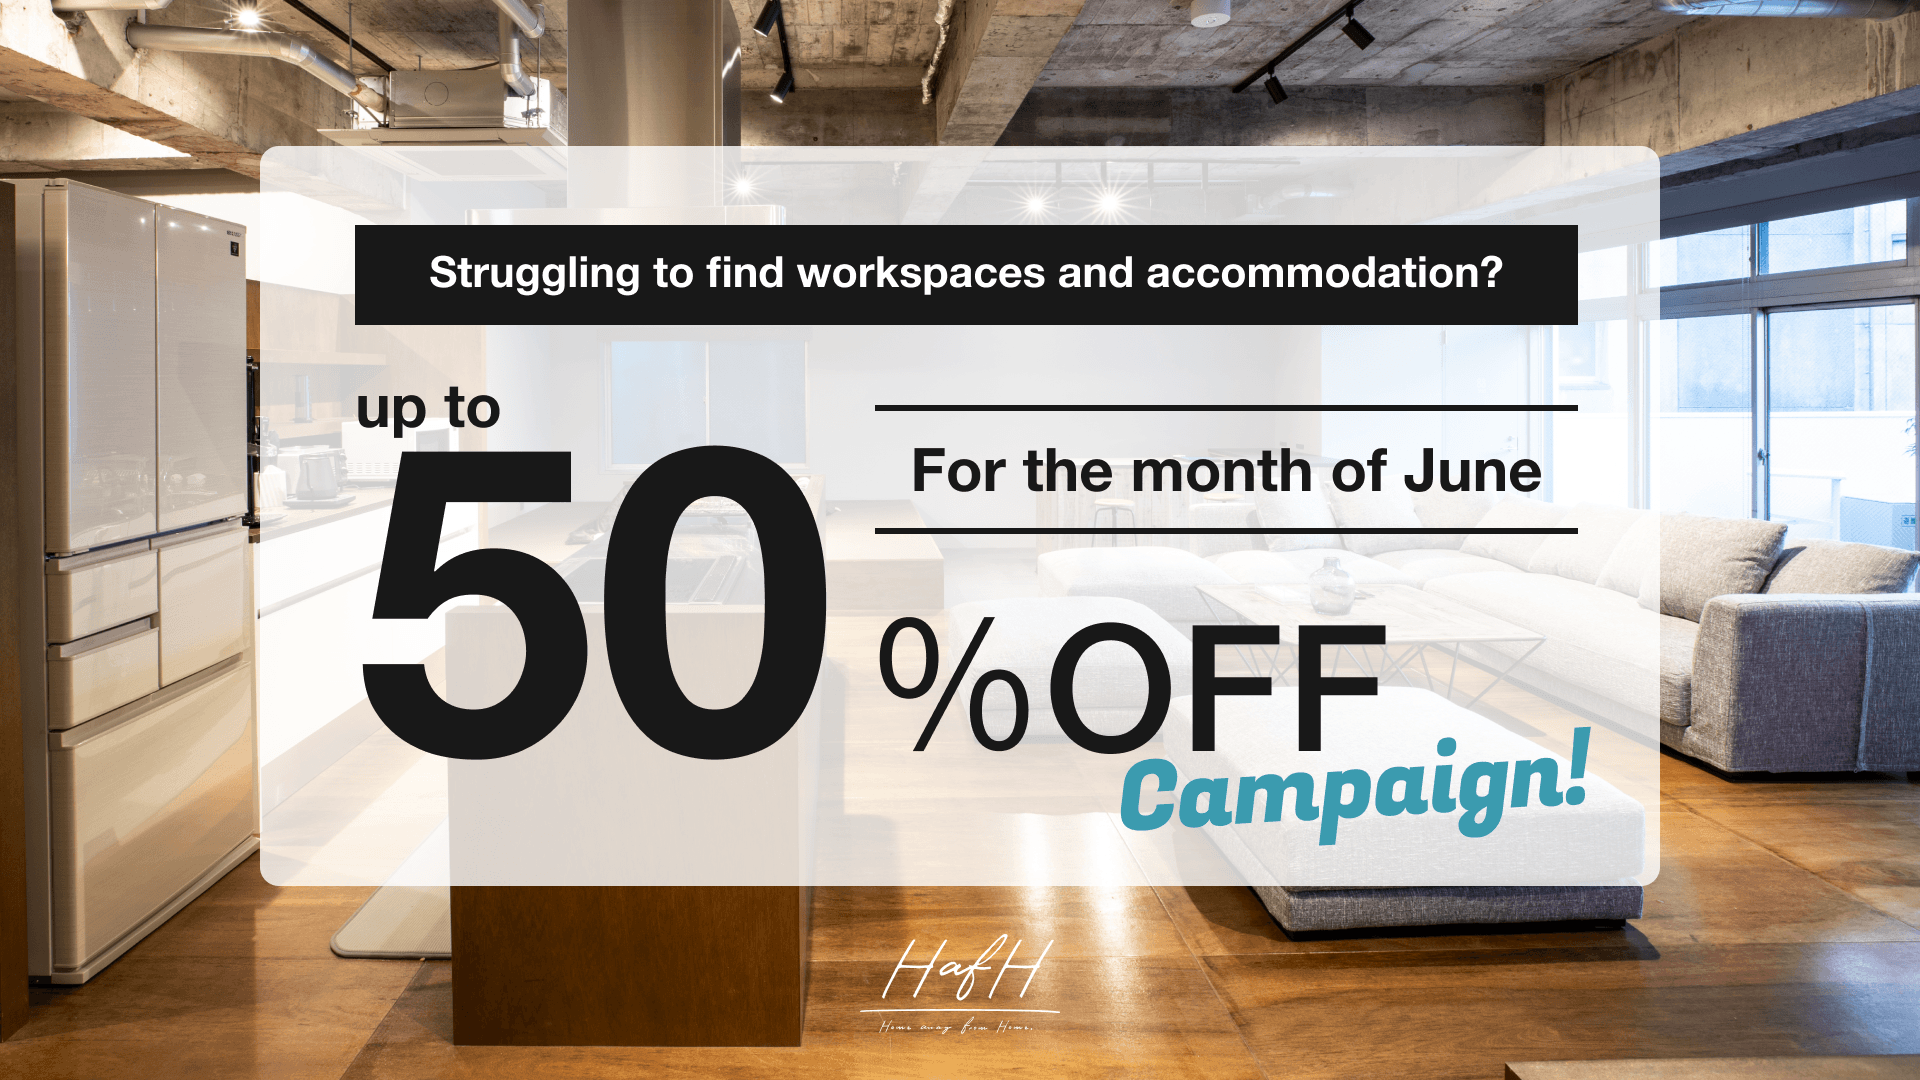 【Up to 50% off!】Up to 50% off HafH’s subscription accommodation service for the month of June!